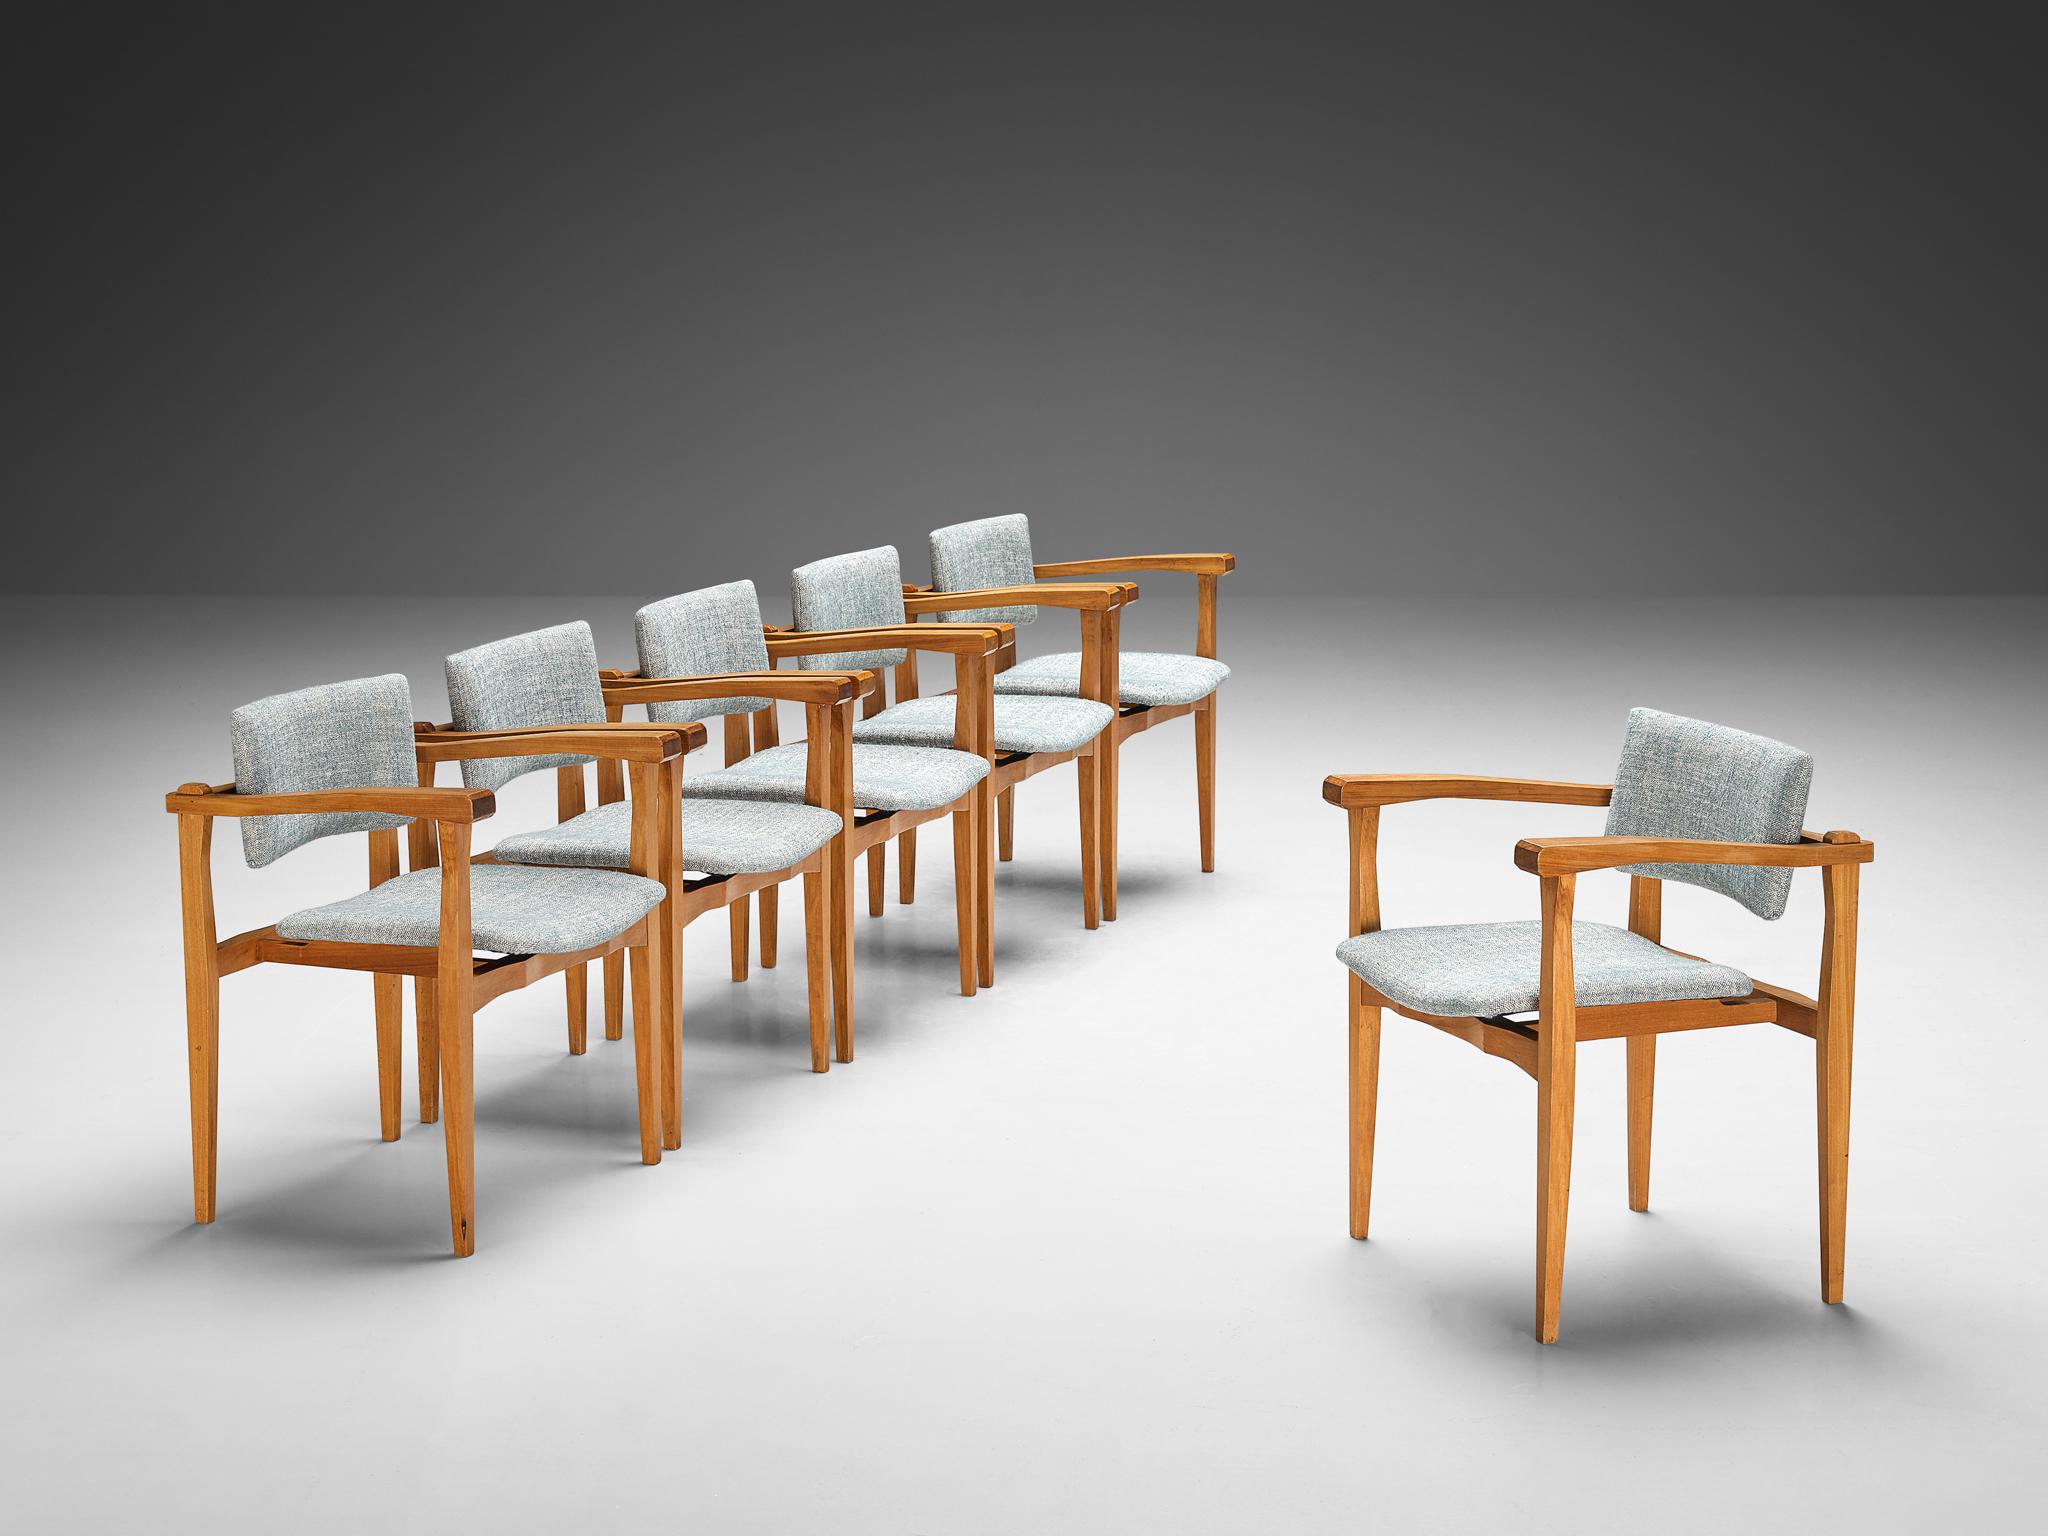 Set of six armchairs, walnut, fabric by Pierre Frey, Italy, 1960s.

This set of six armchairs made in Italy is modest and pure in its design. The chairs feature an open and architectural walnut wooden frame, build up from horizontal and vertical